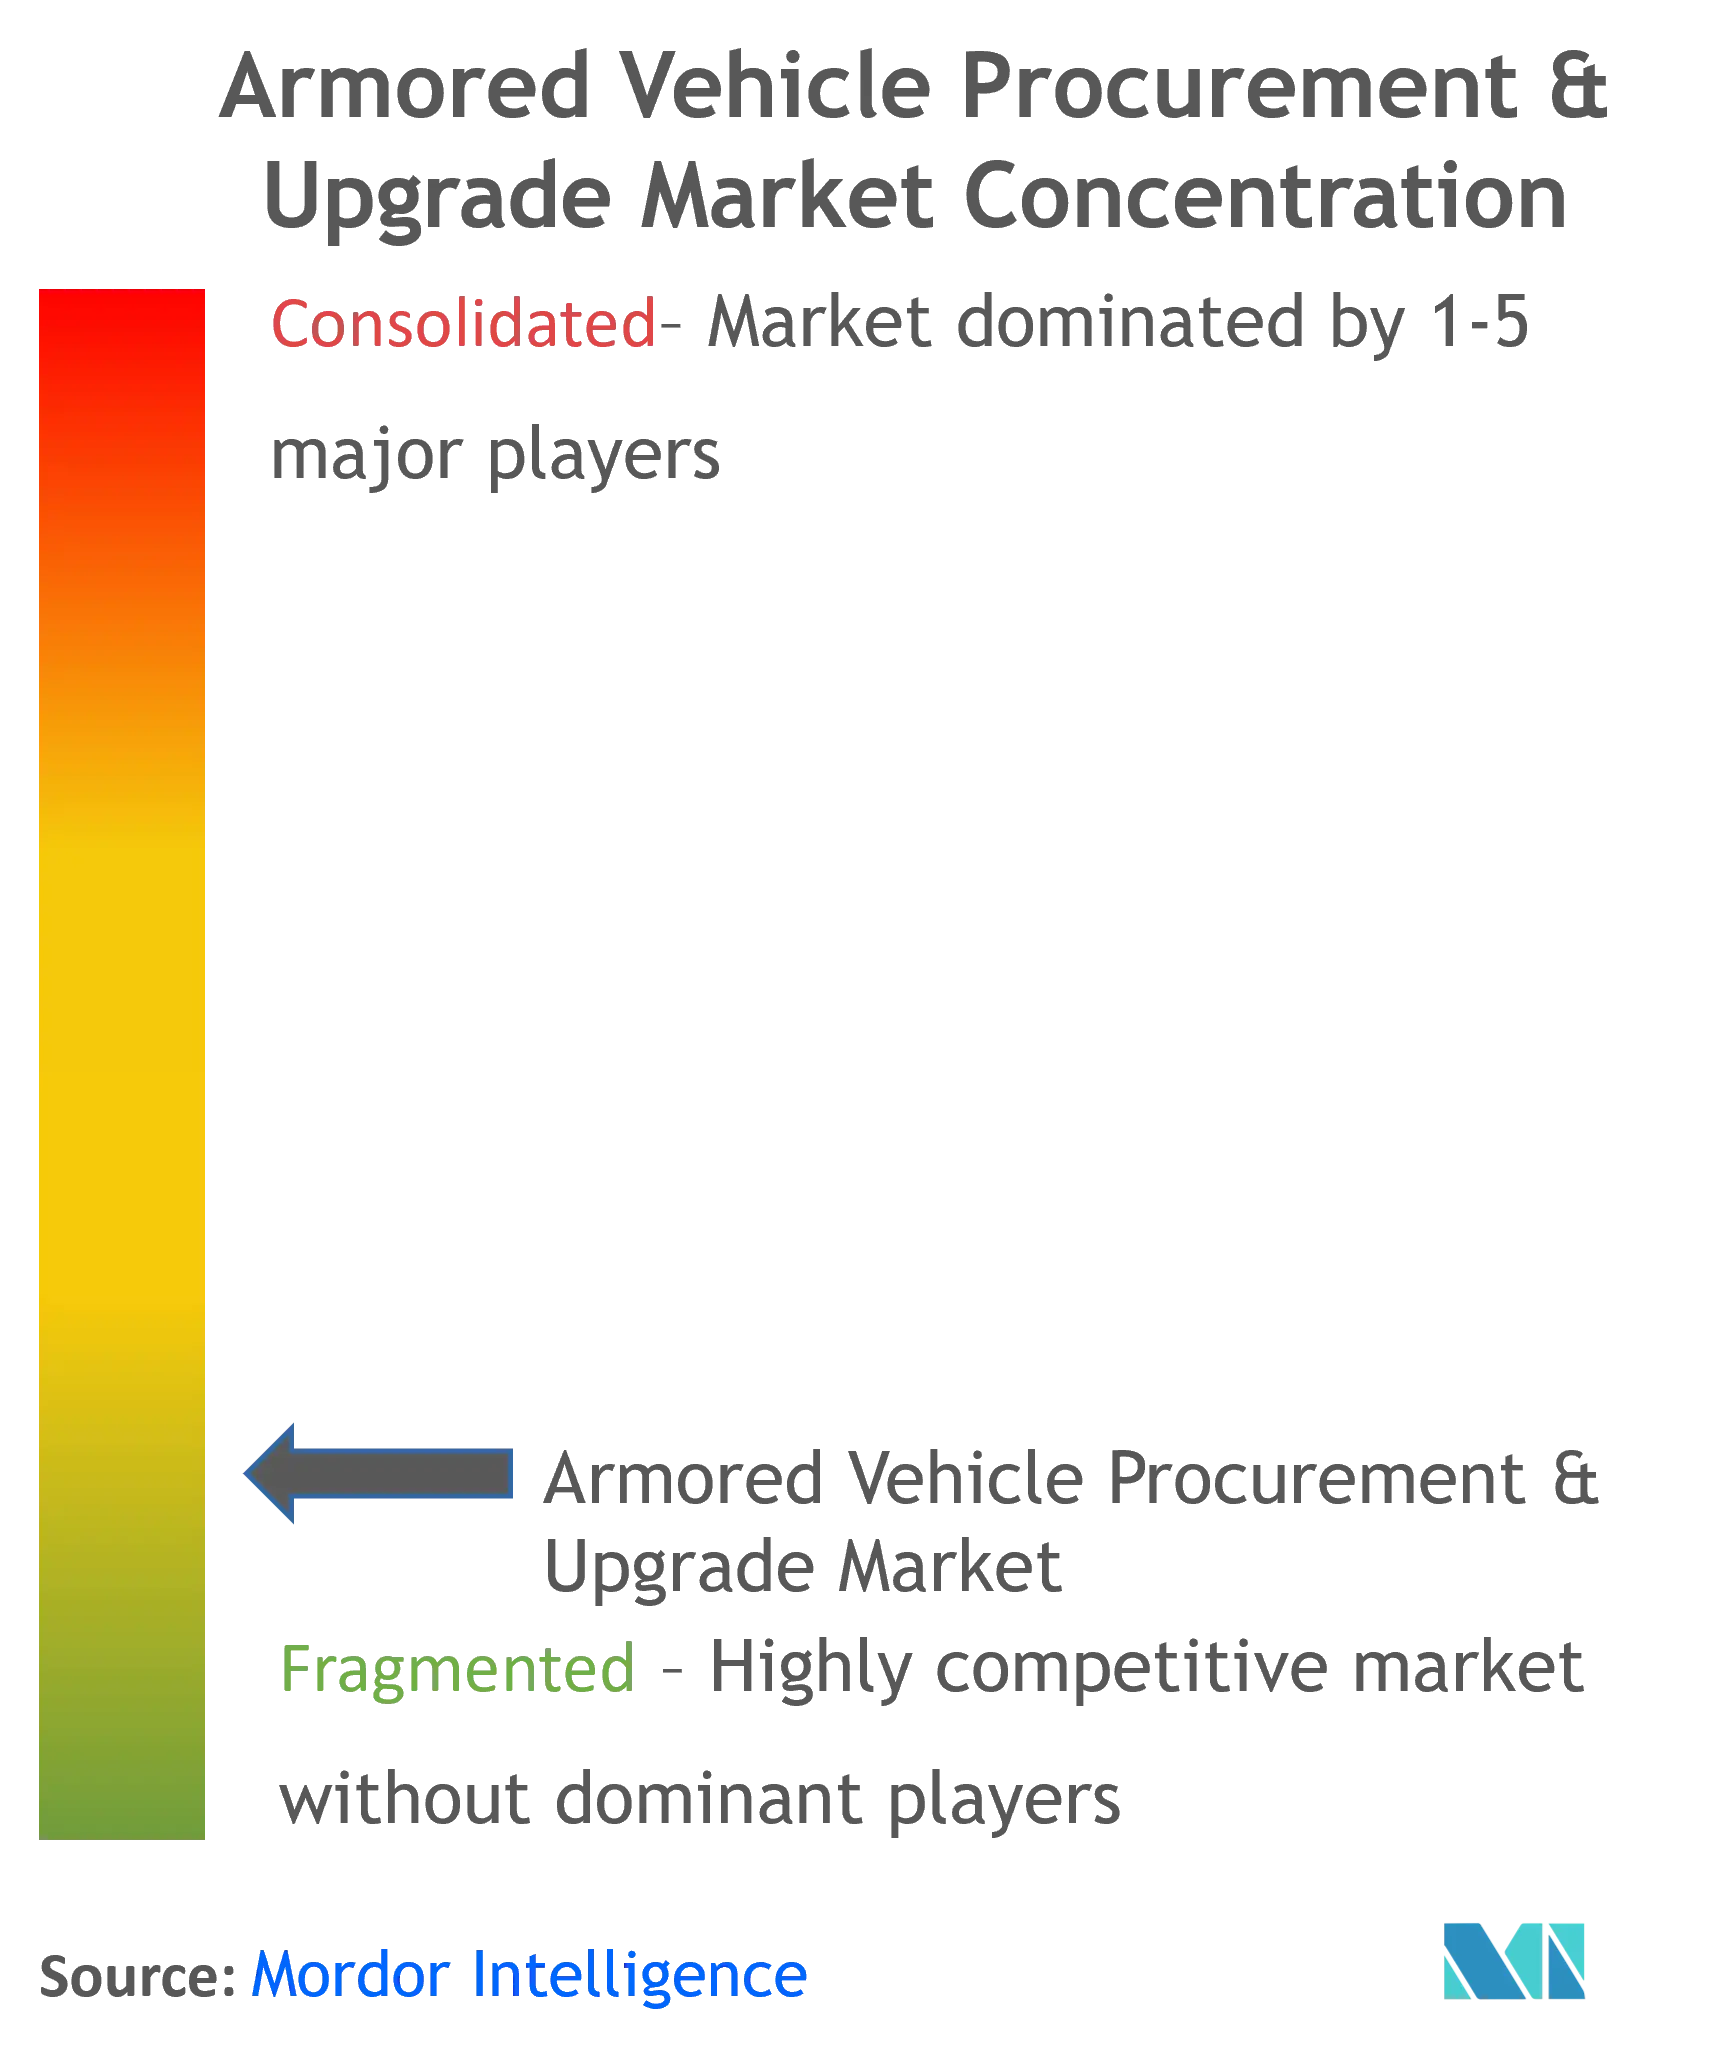 Armored Vehicle Procurement And Upgrade Market Concentration